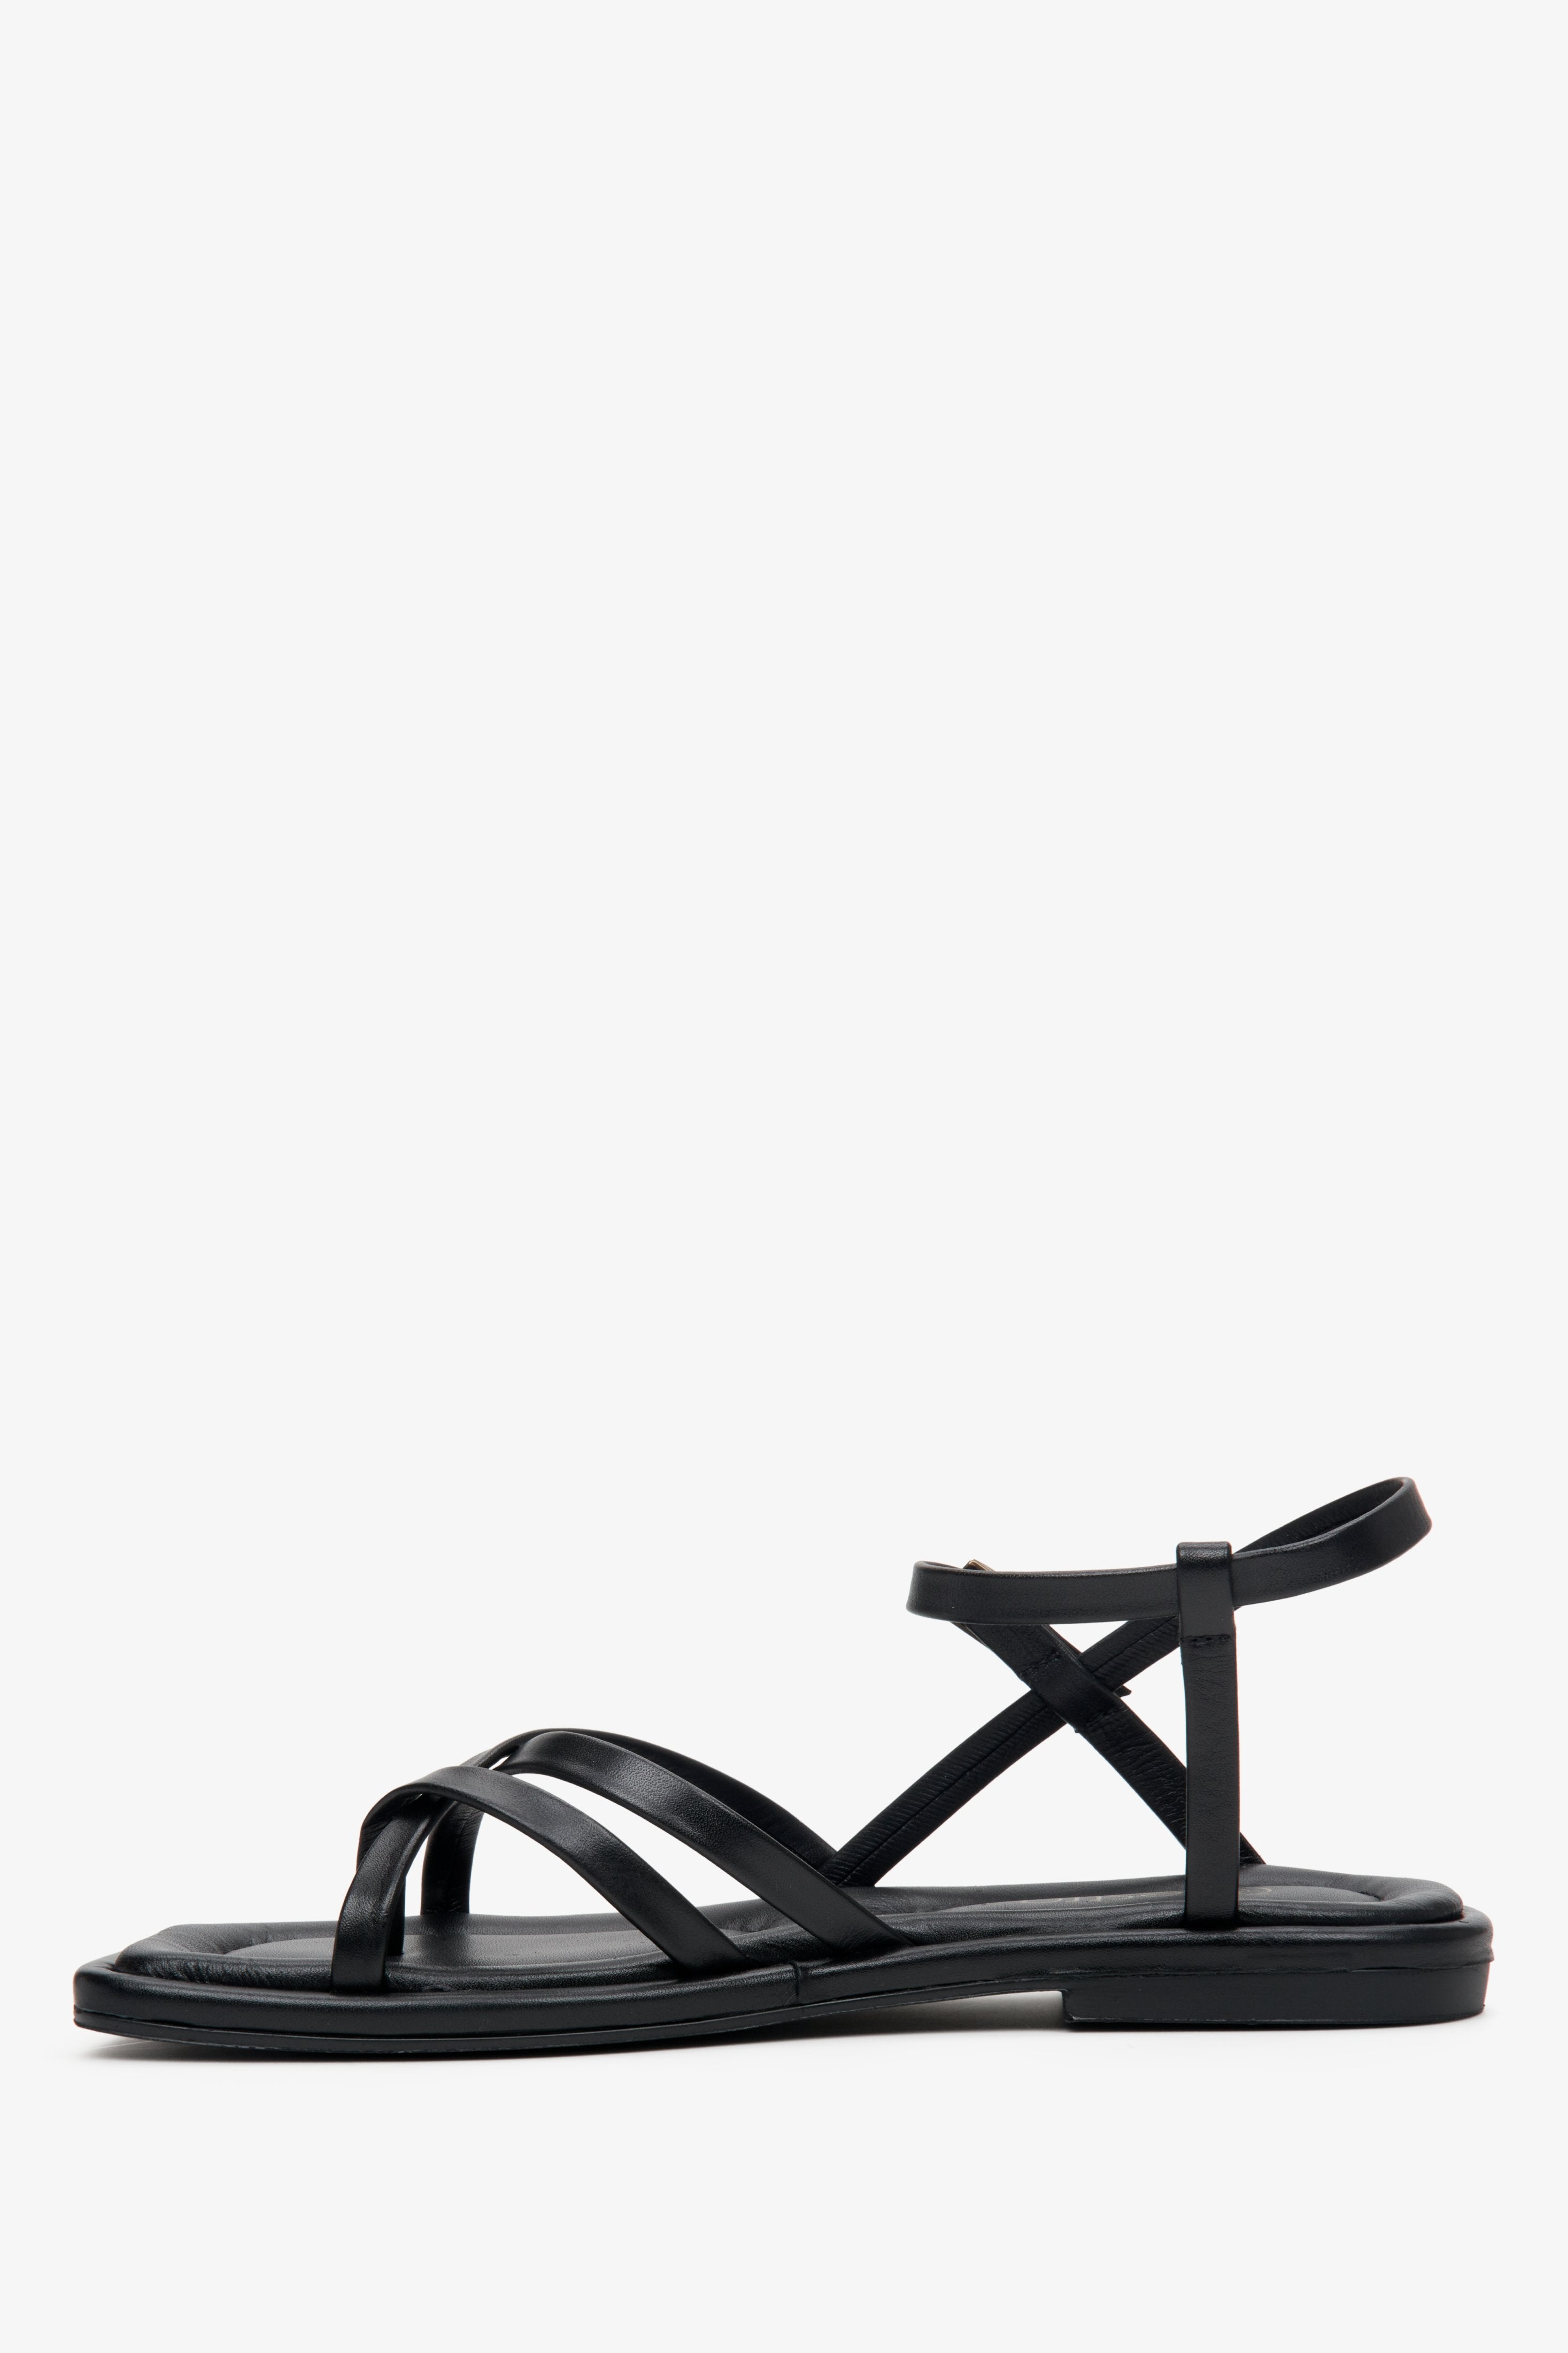 Women's leather lightweight sandals in black with thin cross straps.